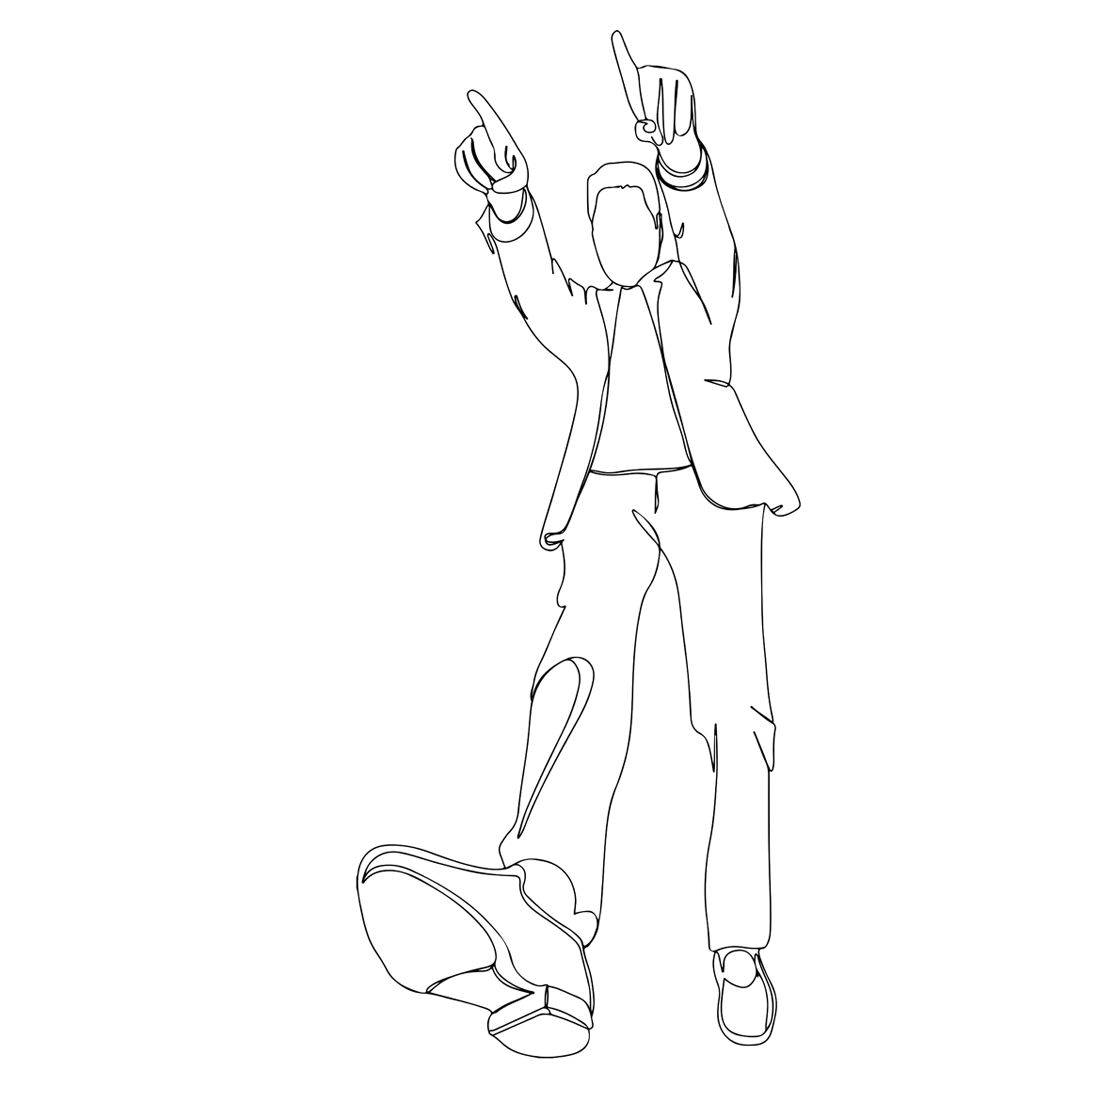 Continuous Sketch Cartoon: Stylish Pose and Hand Gestures Illustration, Bottom View Cartoon ...